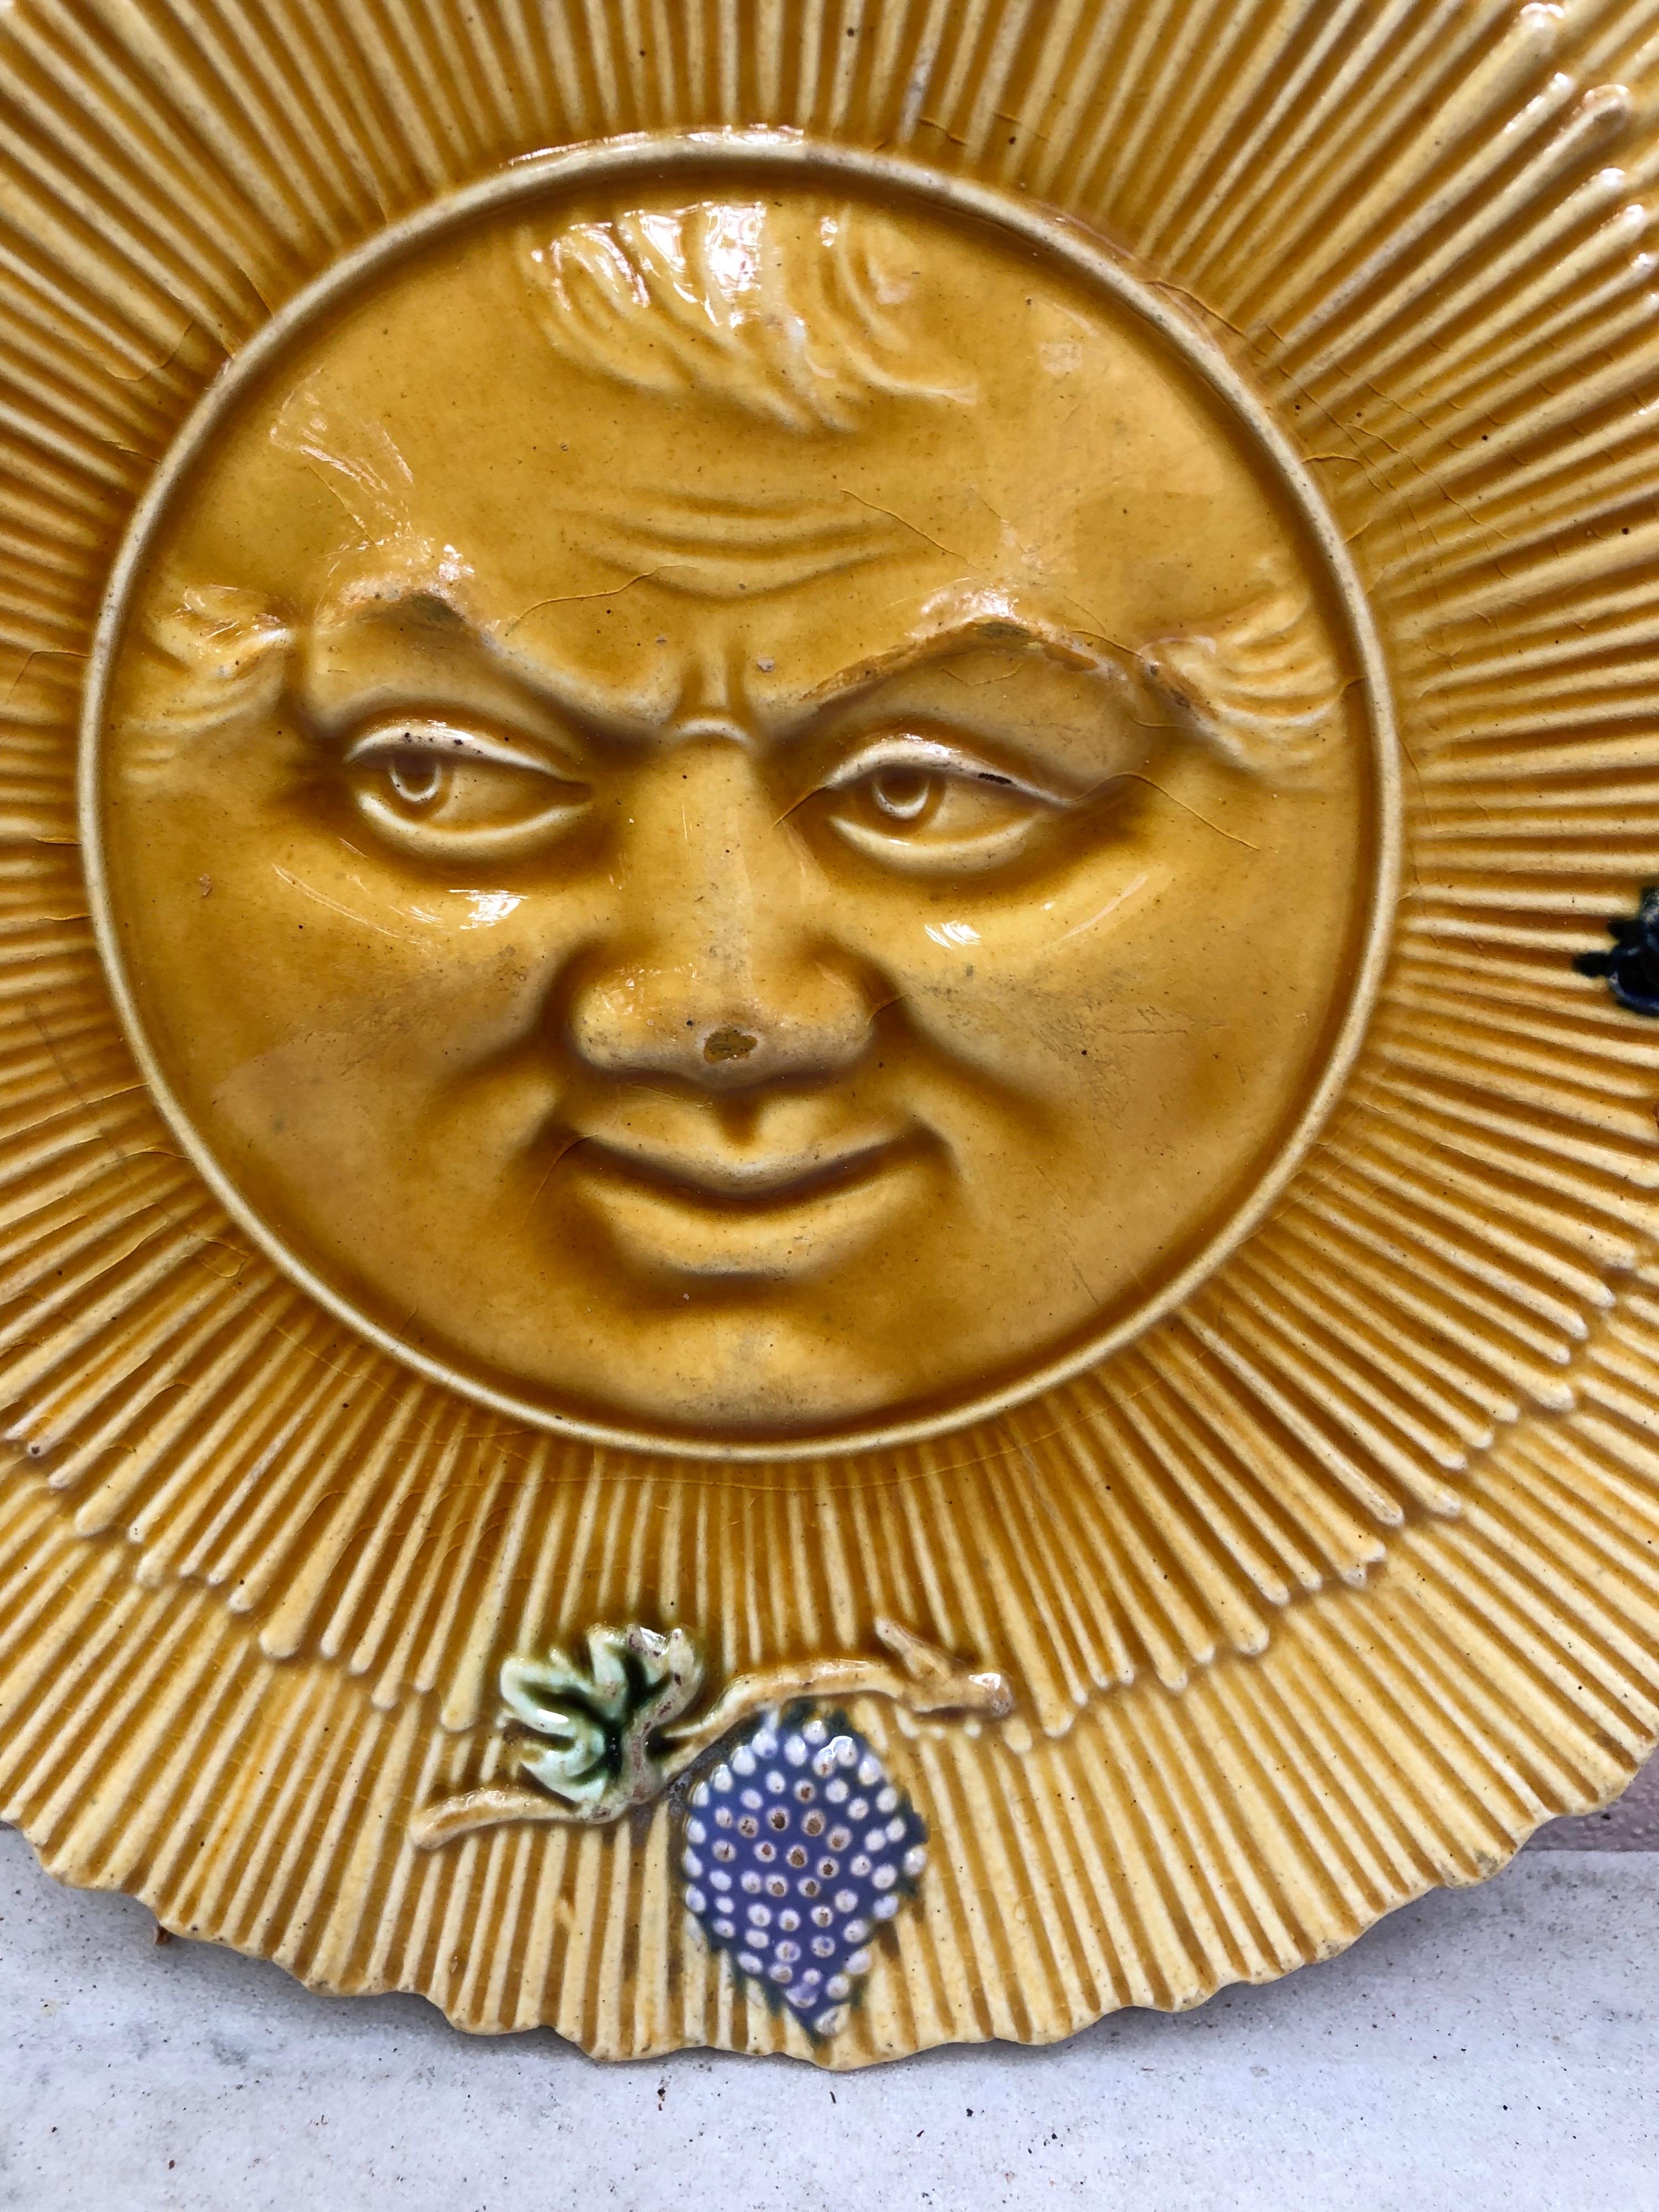 Unusual French yellow Majolica sun plate with bird, butterfly, insects and grapes, circa 1880.
     